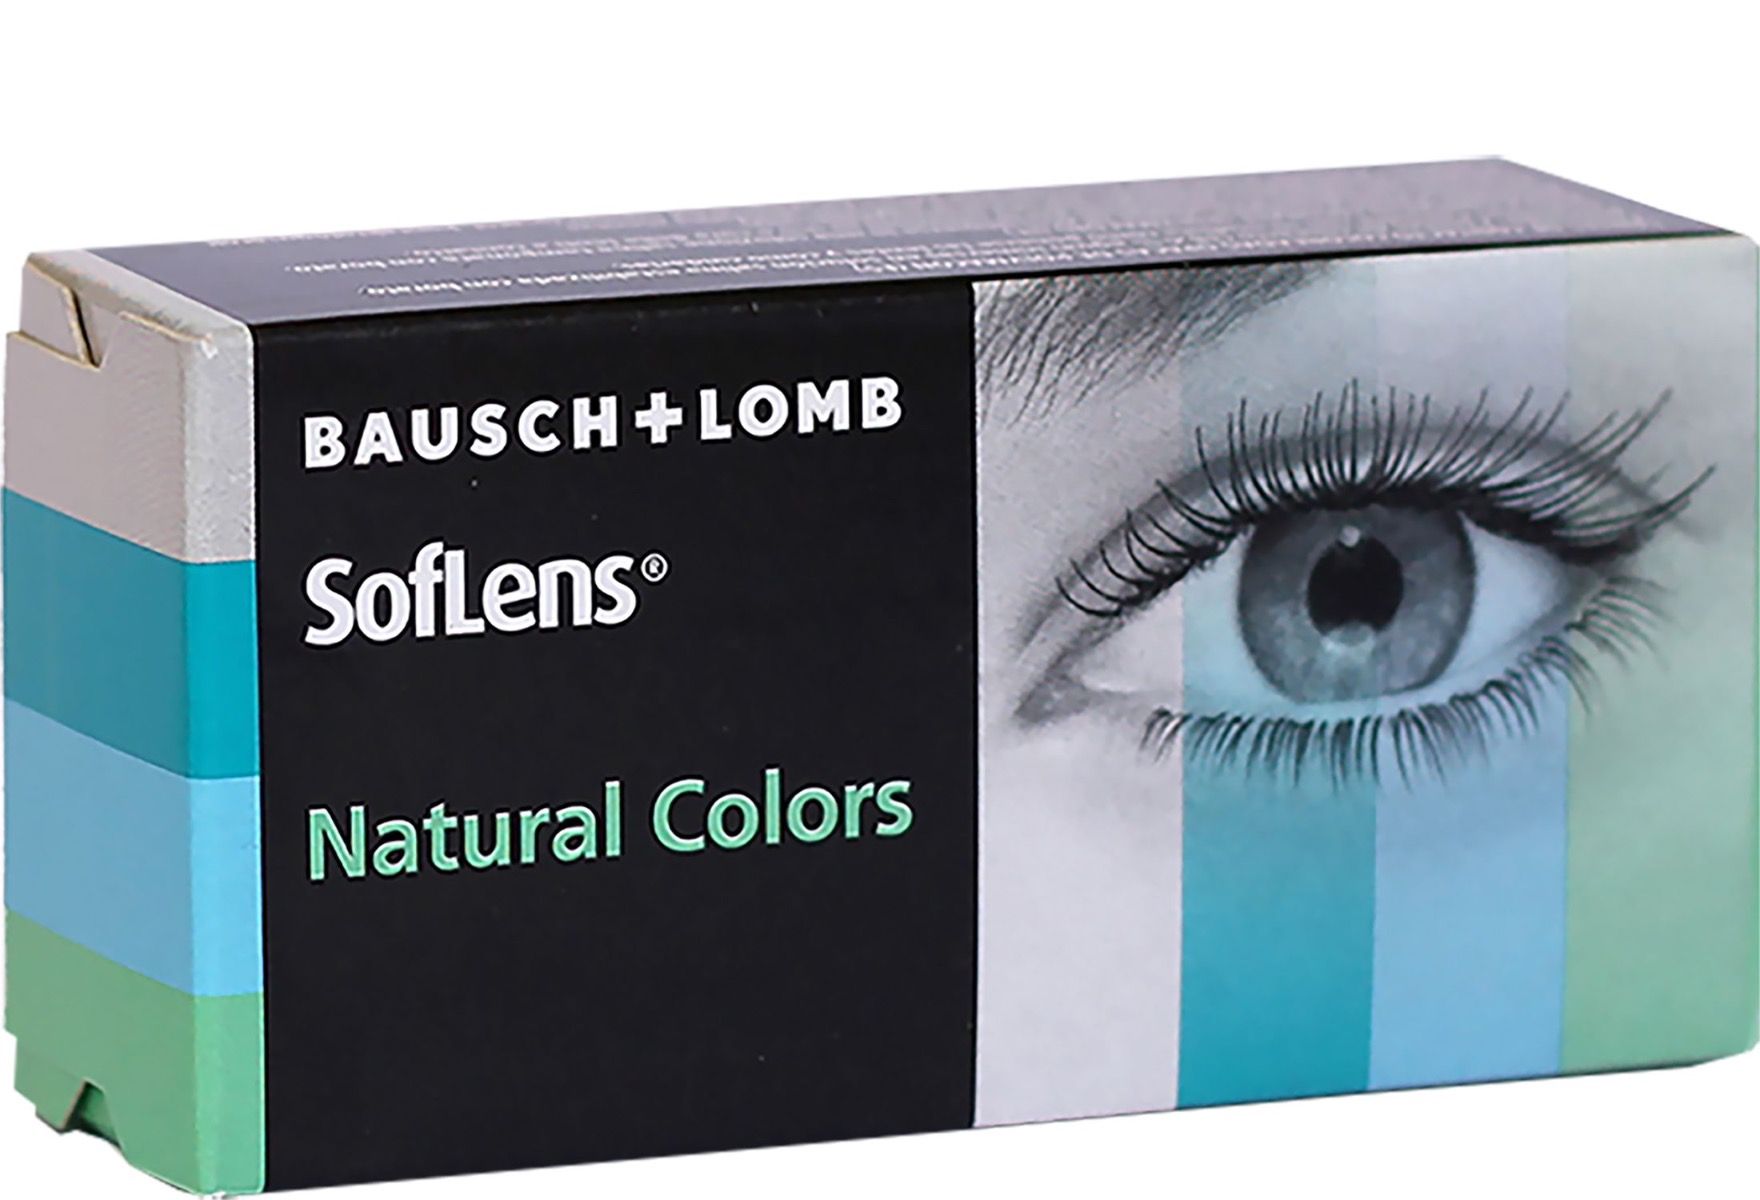 SofLens Natural Colors Pacific 2 stk